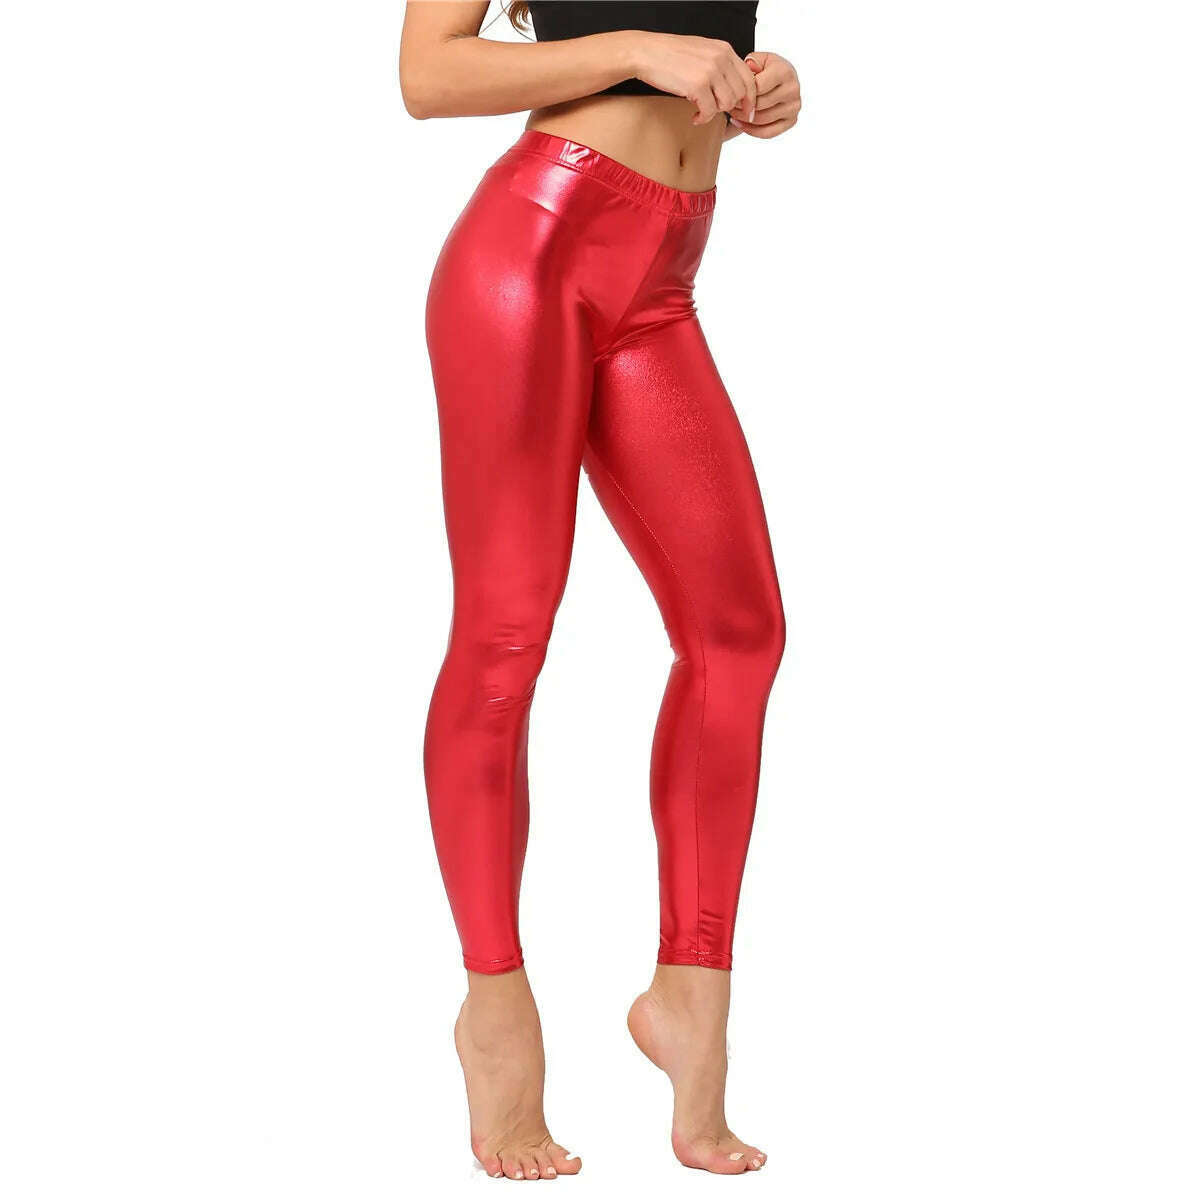 KIMLUD, Metallic Color PU Leggings Women Faux Leather Pants Dancing Party Pant Sexy Night Club Skinny Costume Pants Tight Trousers, Red / One size 50kg below, KIMLUD Womens Clothes